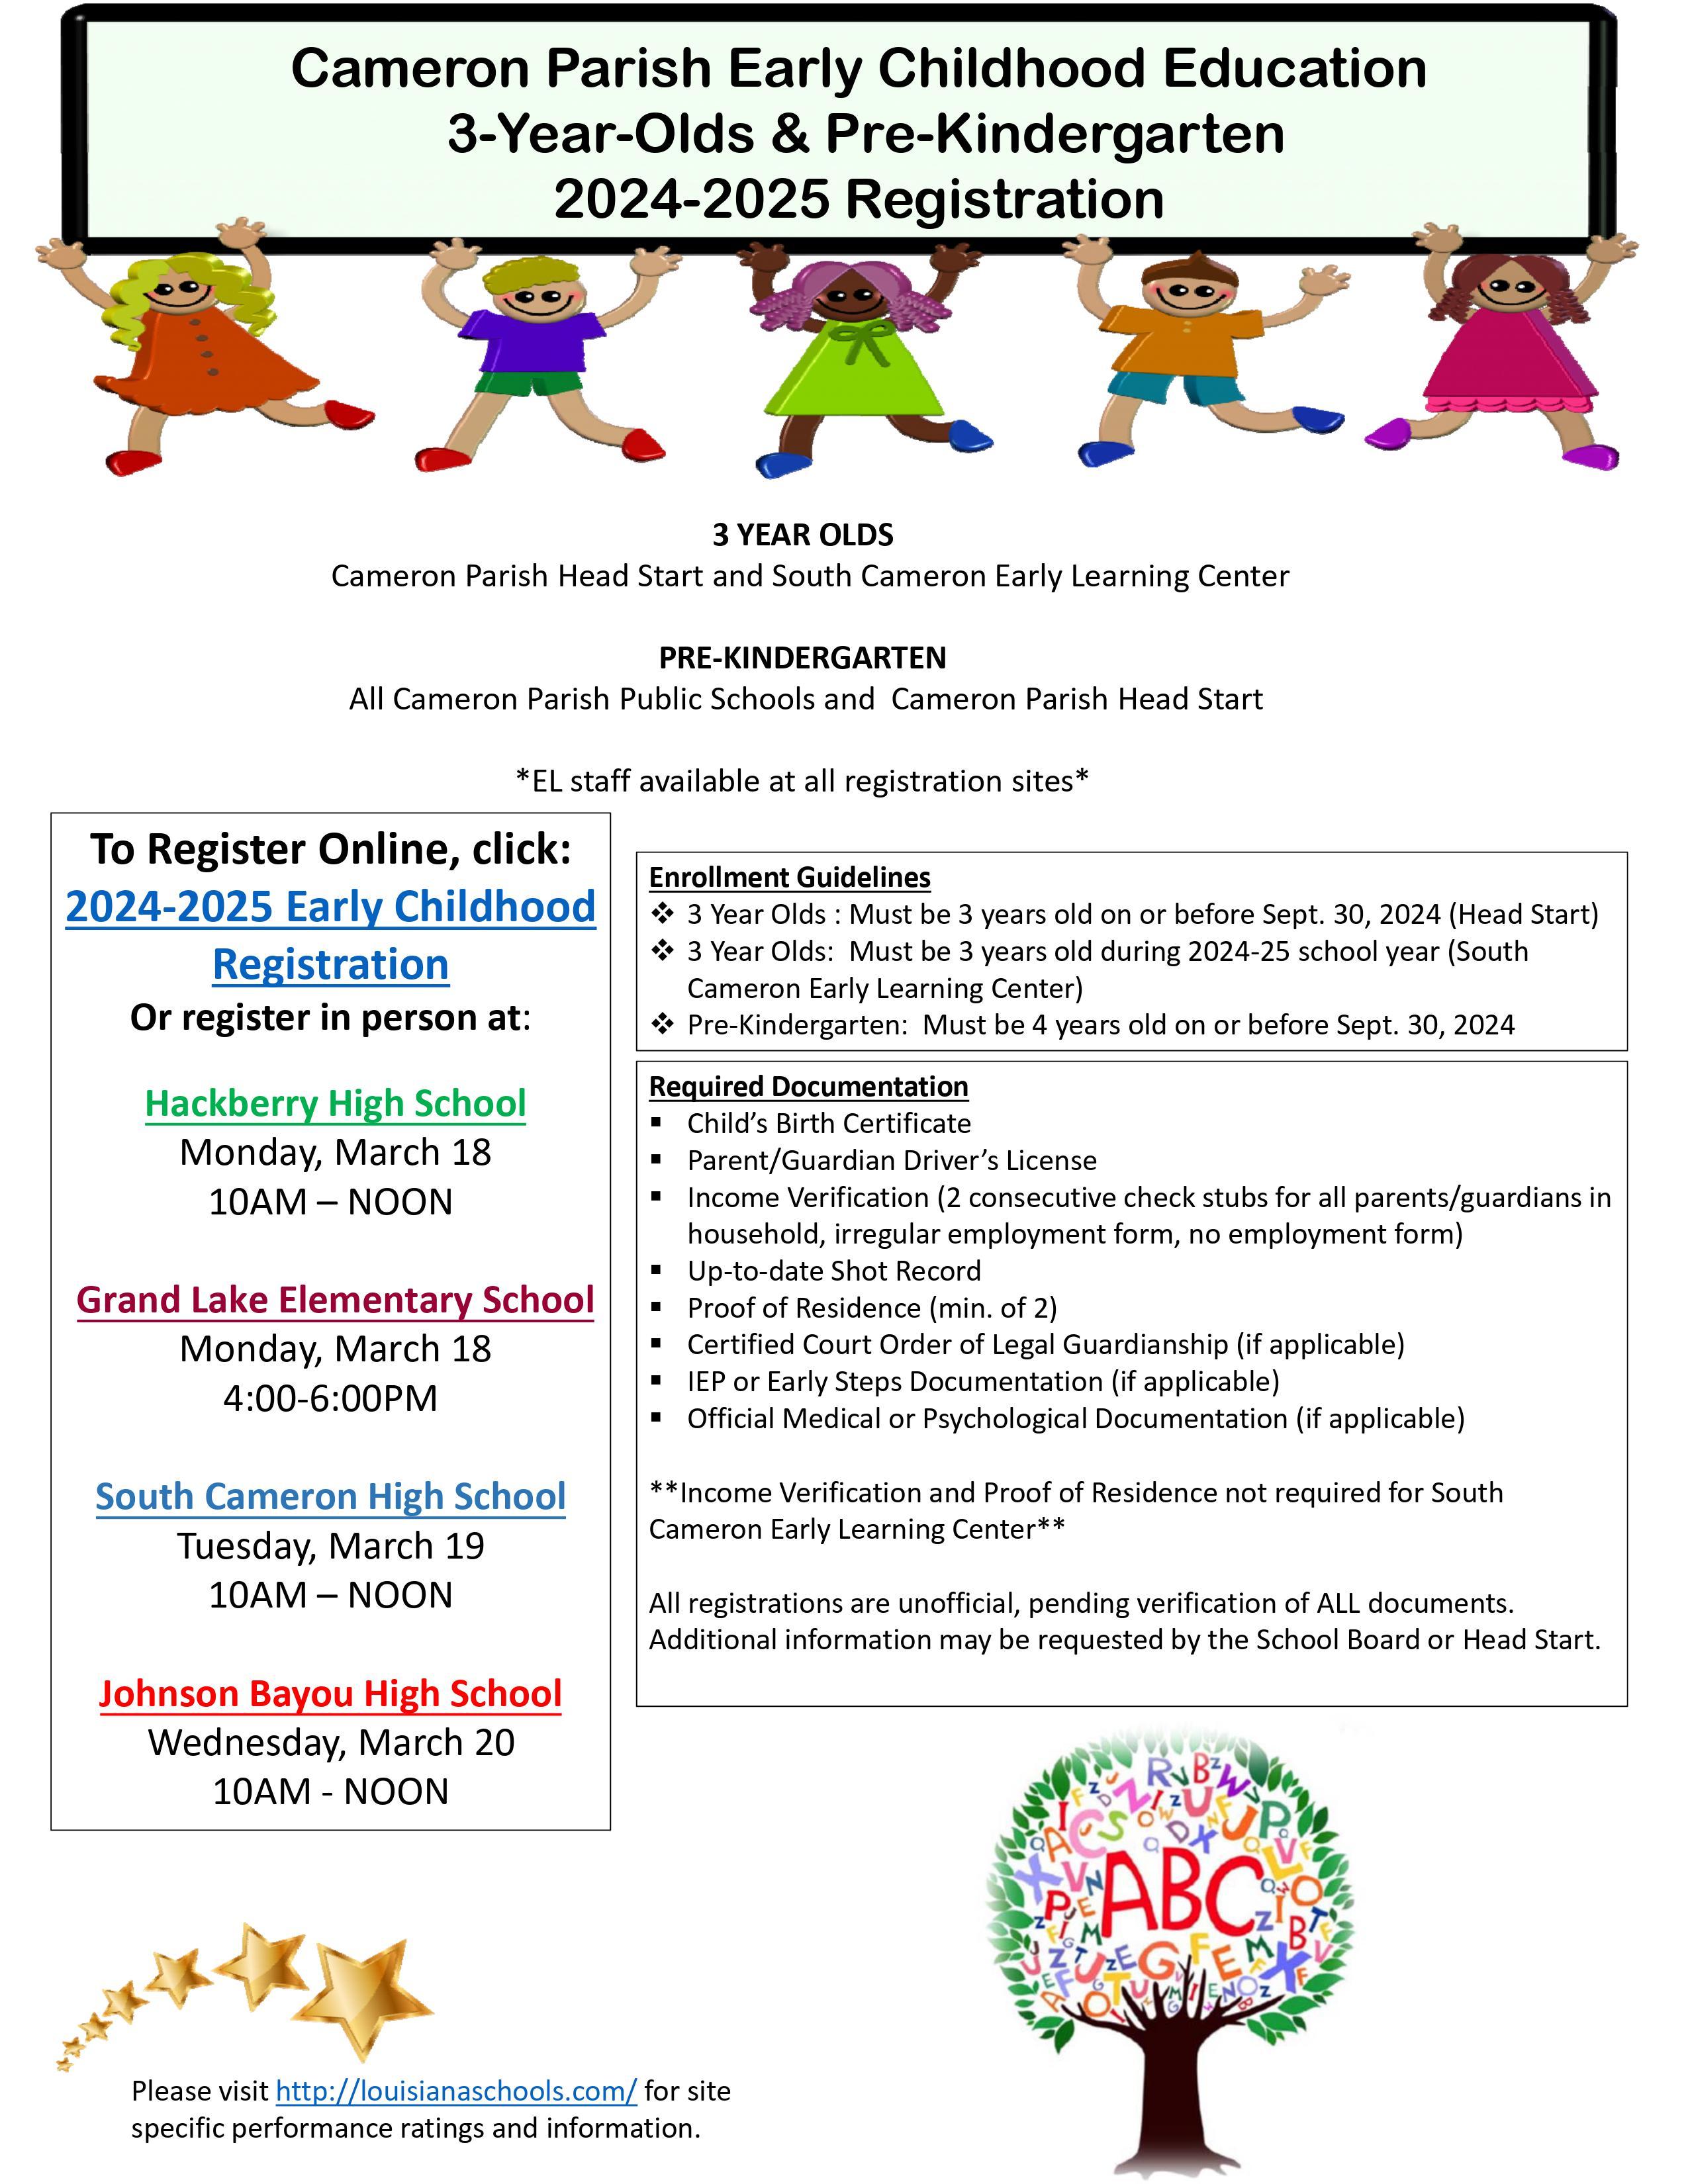  Early Childhood Registration for 24-25